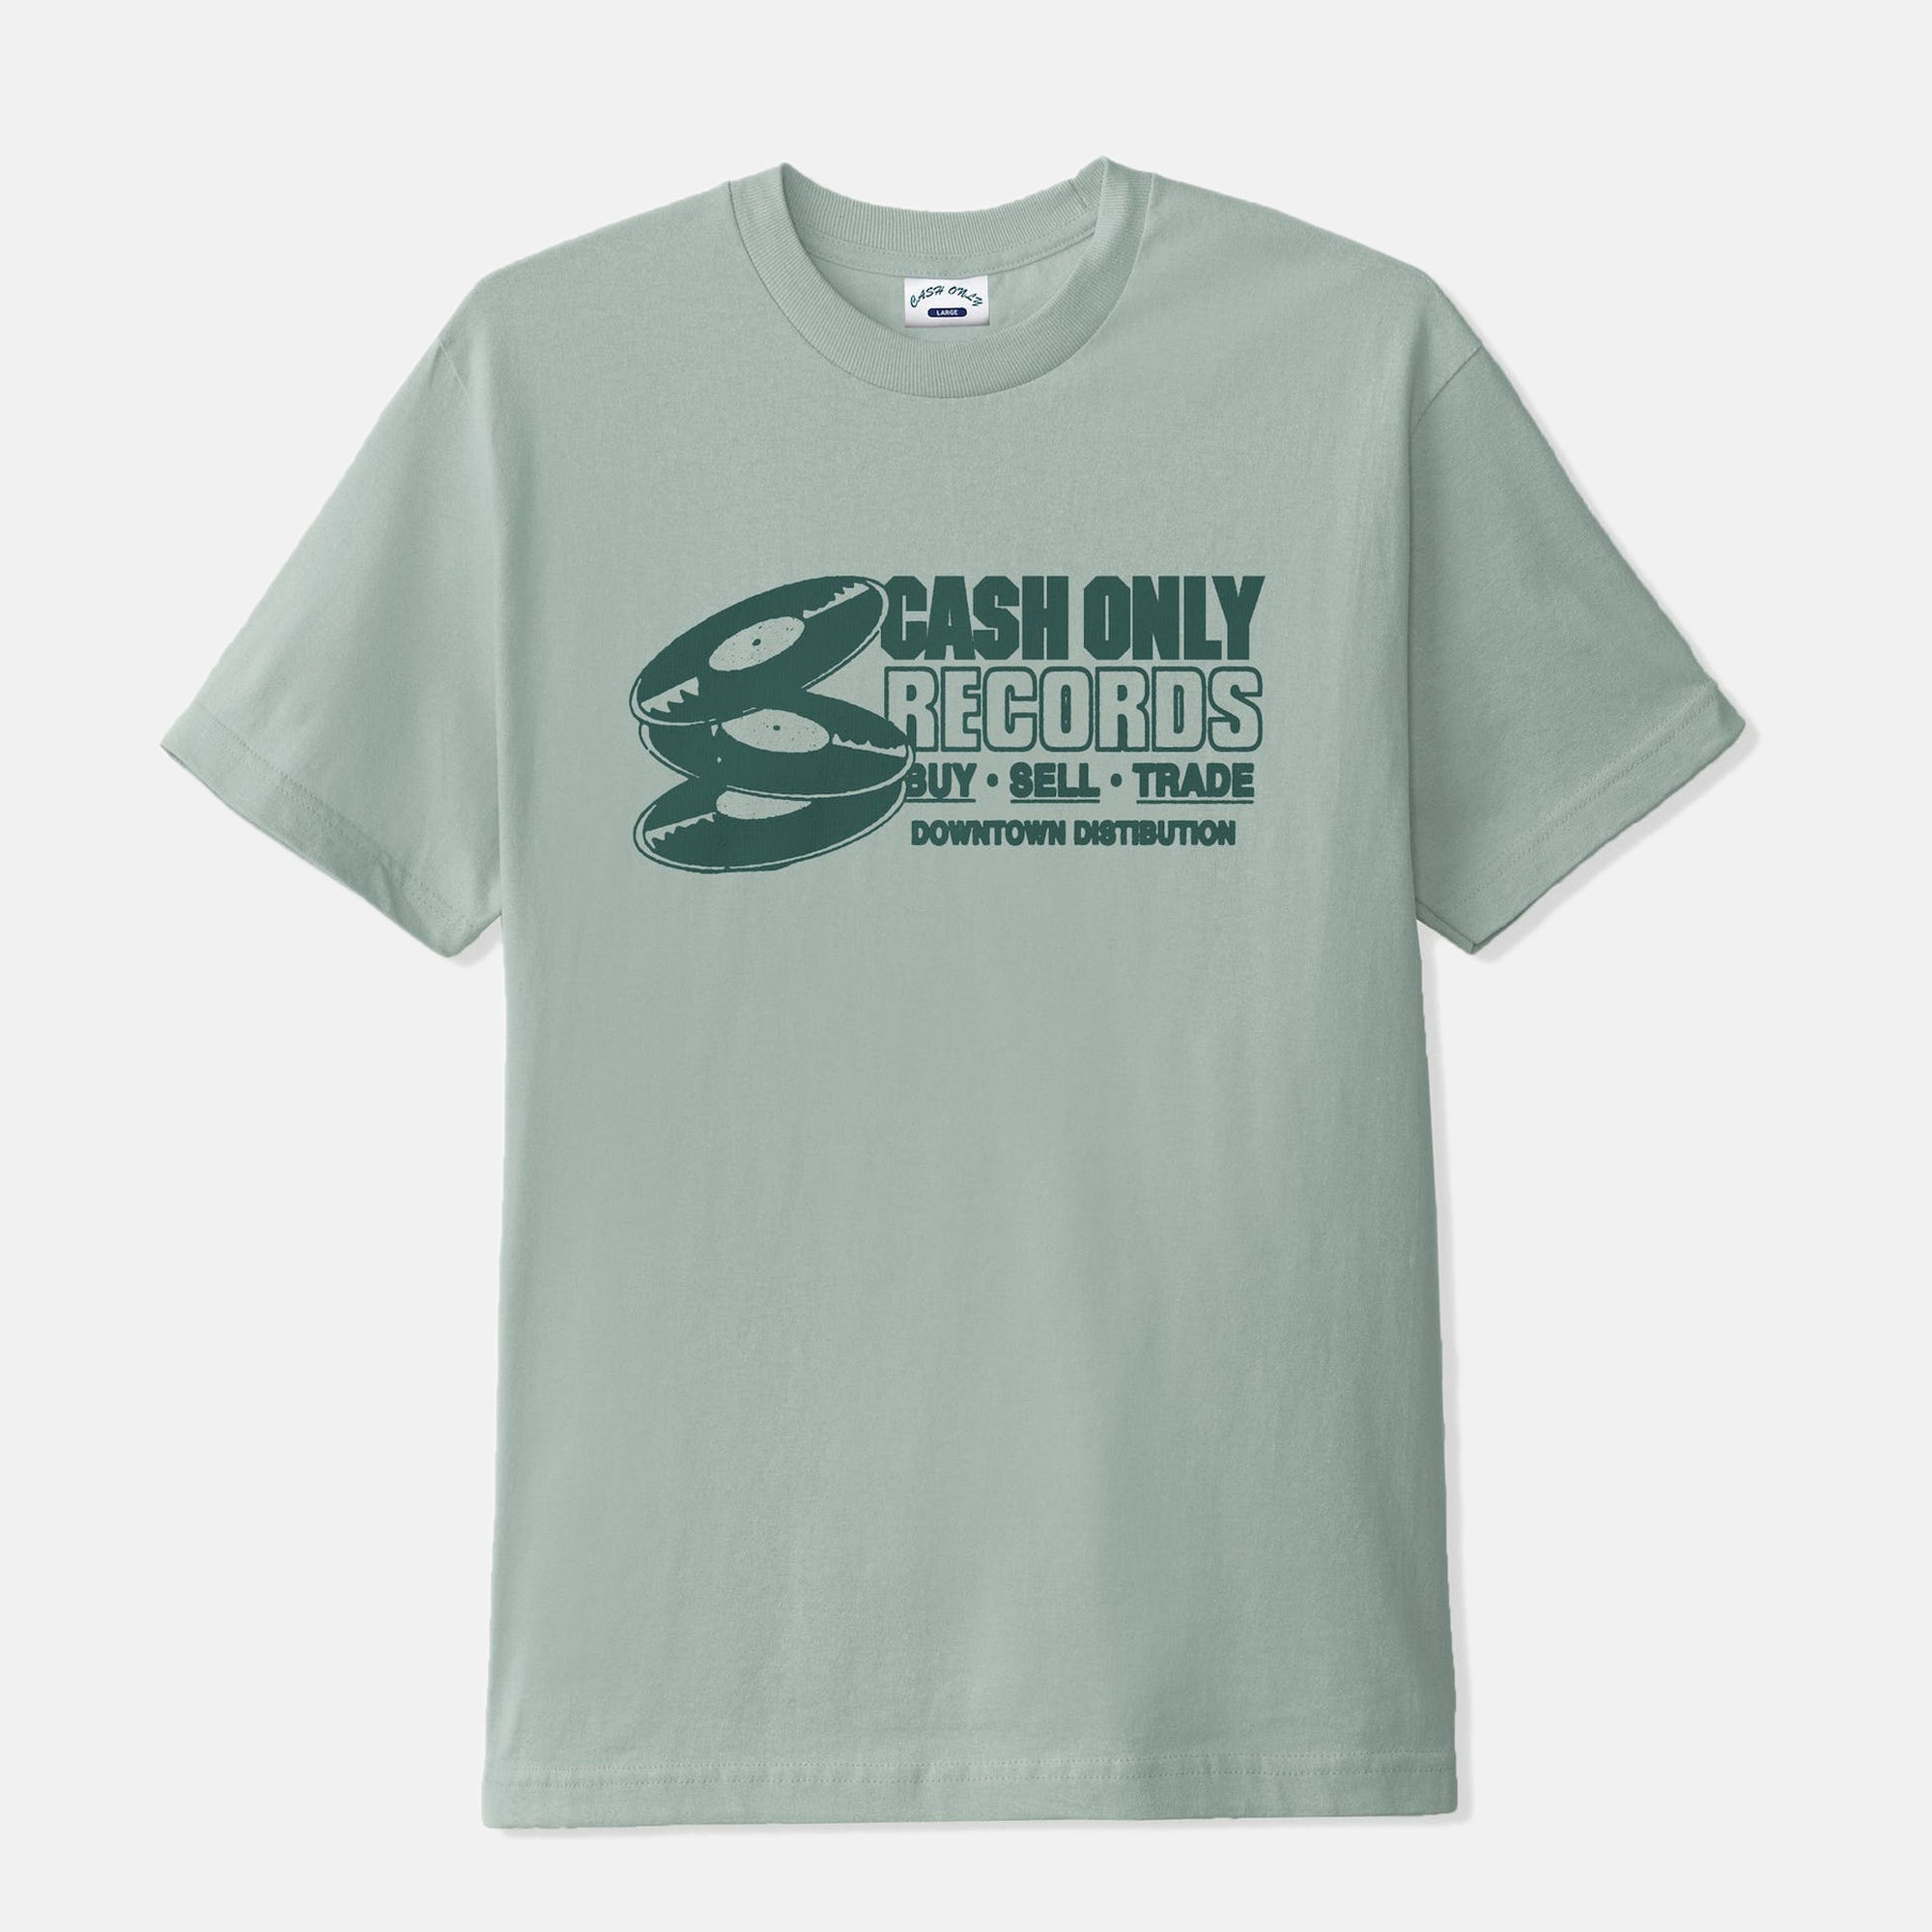 Cash Only - Promotional Use T-Shirt - Dove